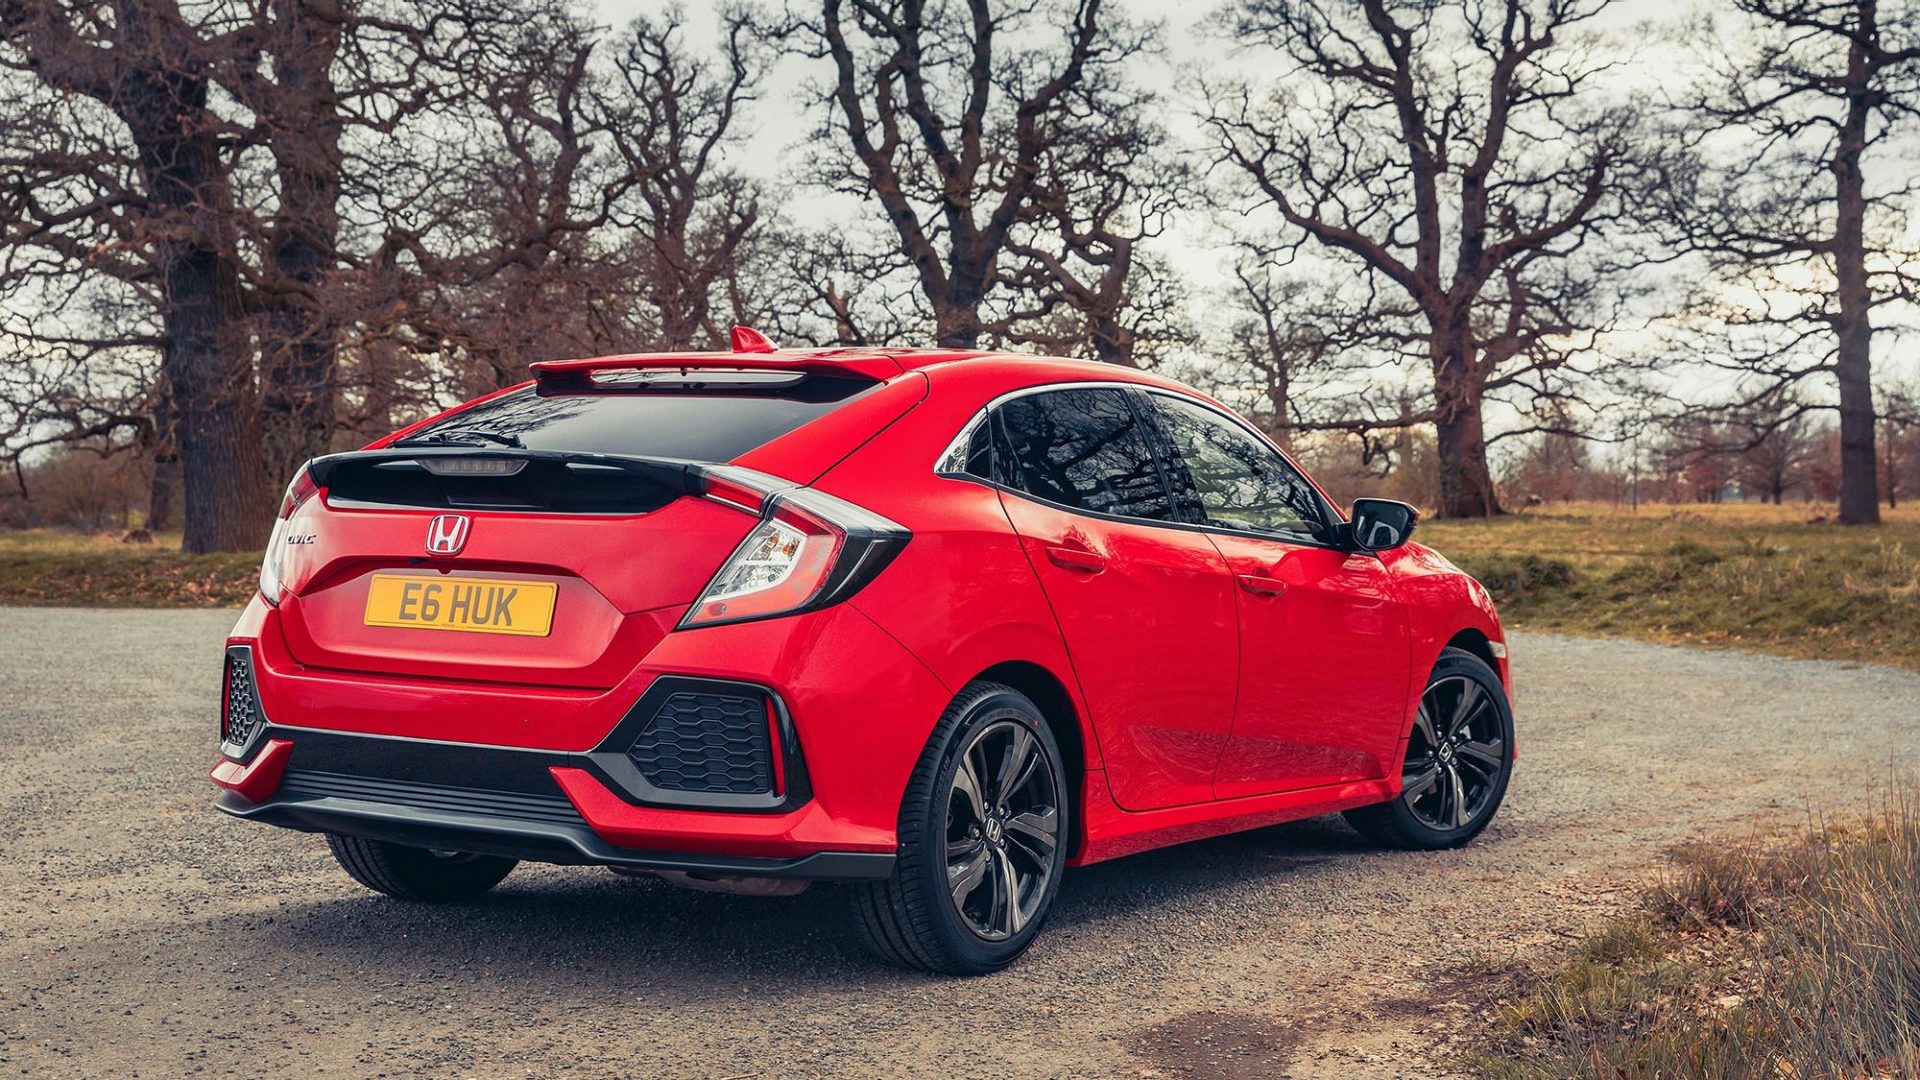 Honda UK brings a bold Civic to new audiences with Niche